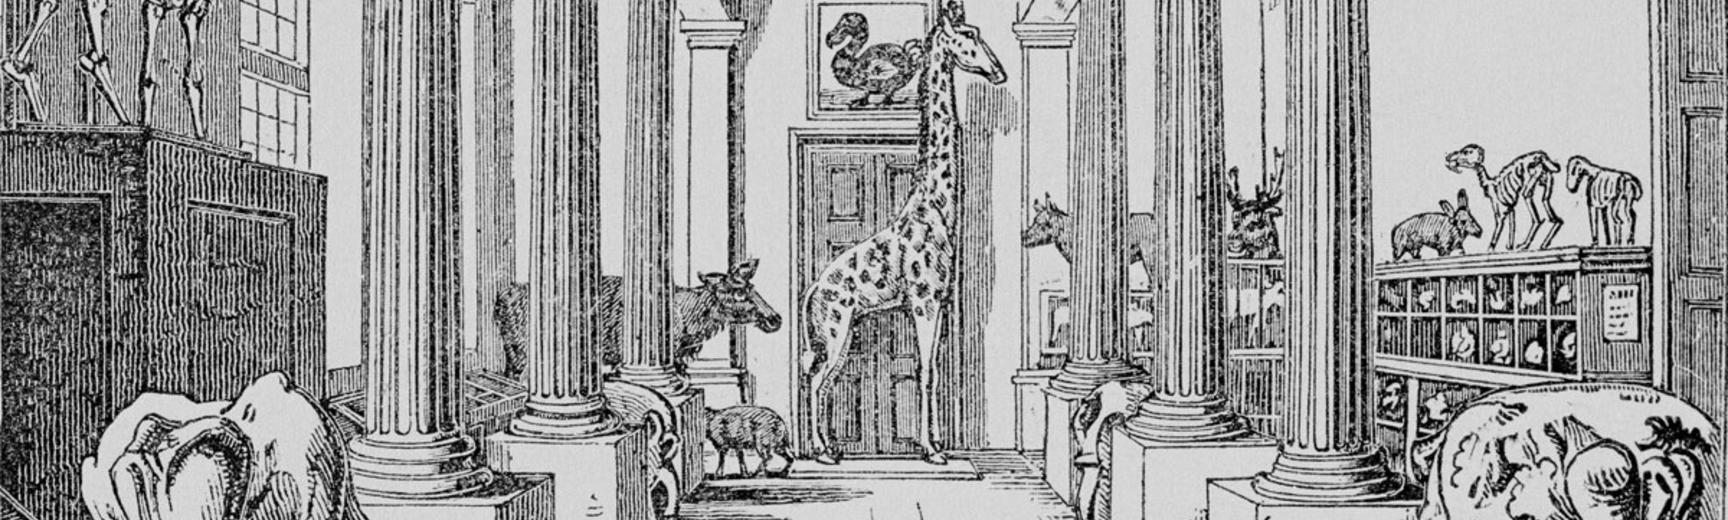 An image of the interior of the entrance hall to the old Ashmolean Museum, the History of Science Museum, featuring a sculpture of a giraffe at the centre of the image